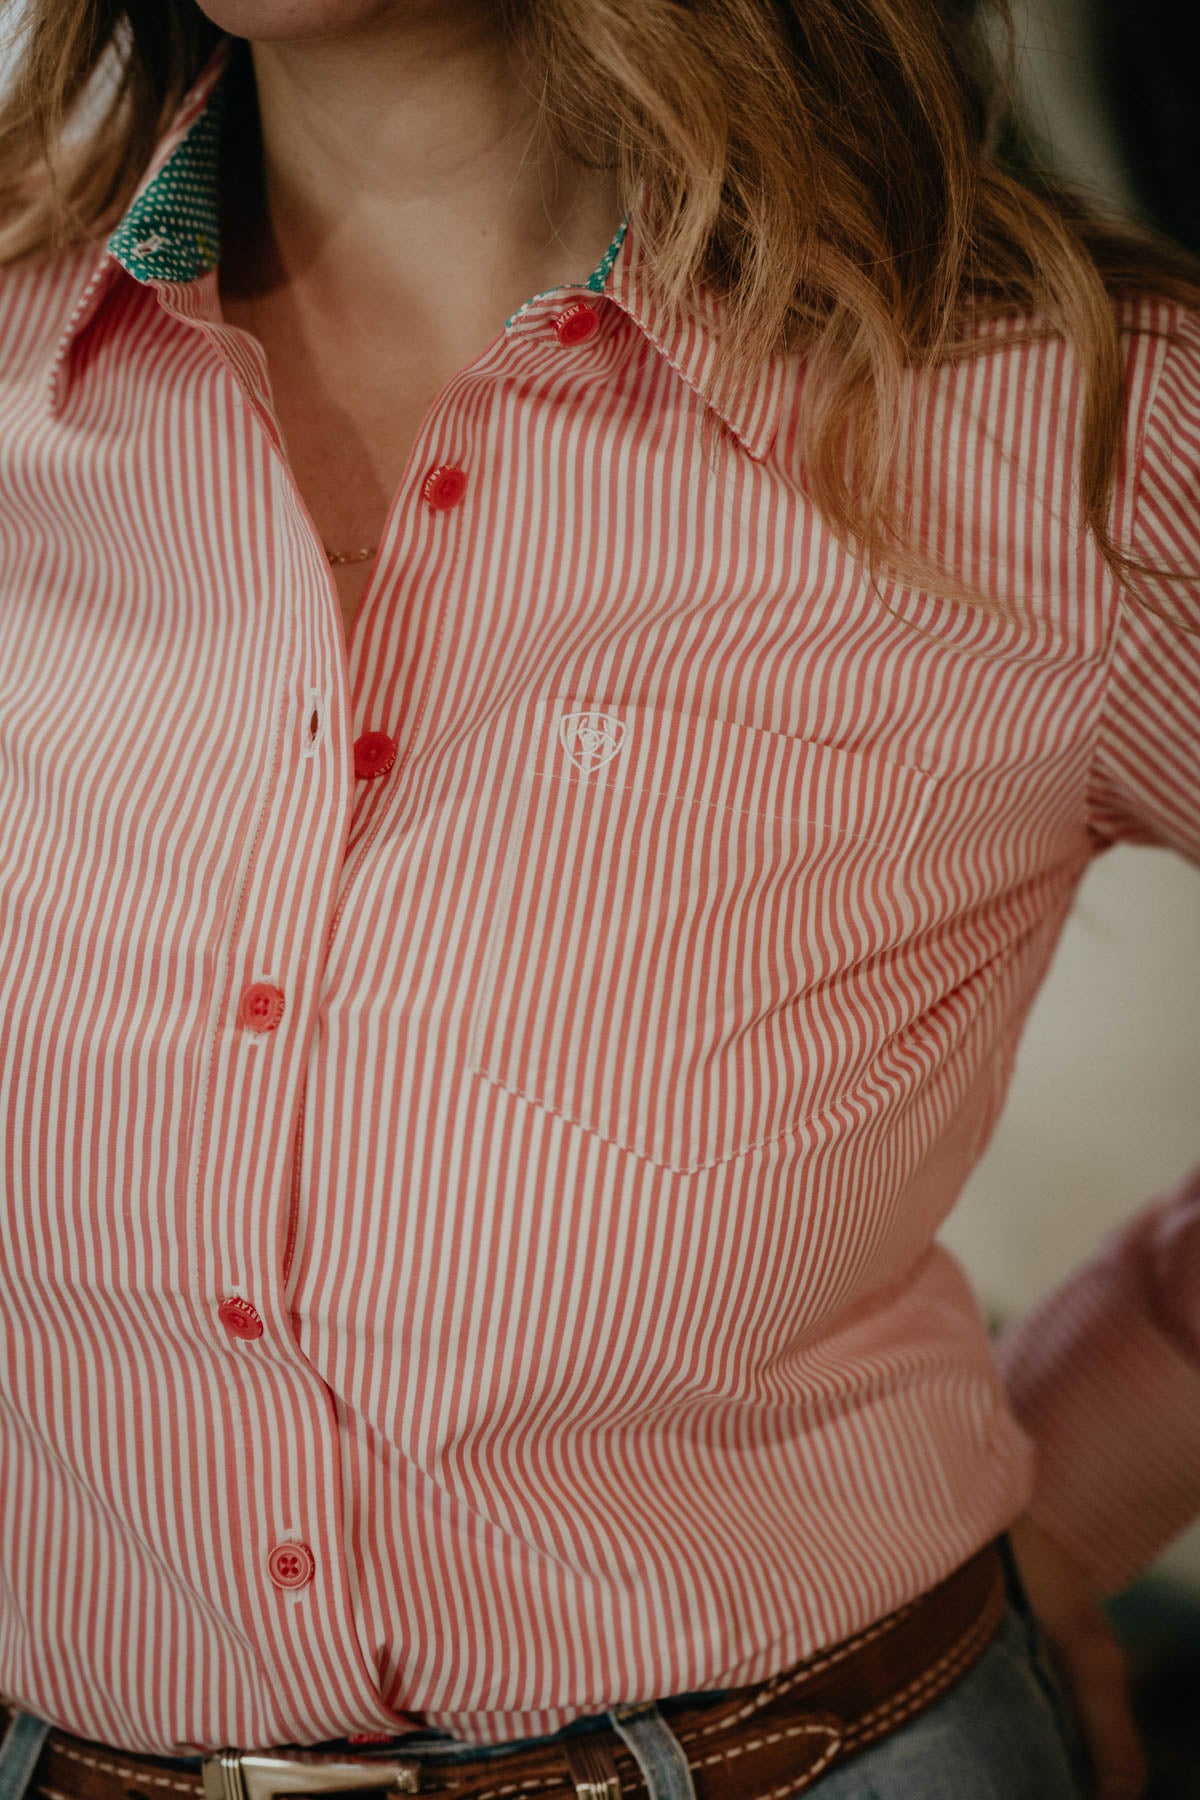 'Tottie' Ariat Corral Pin Striped Kirby Shirt with Contrast Cuffs (XS - XXL)